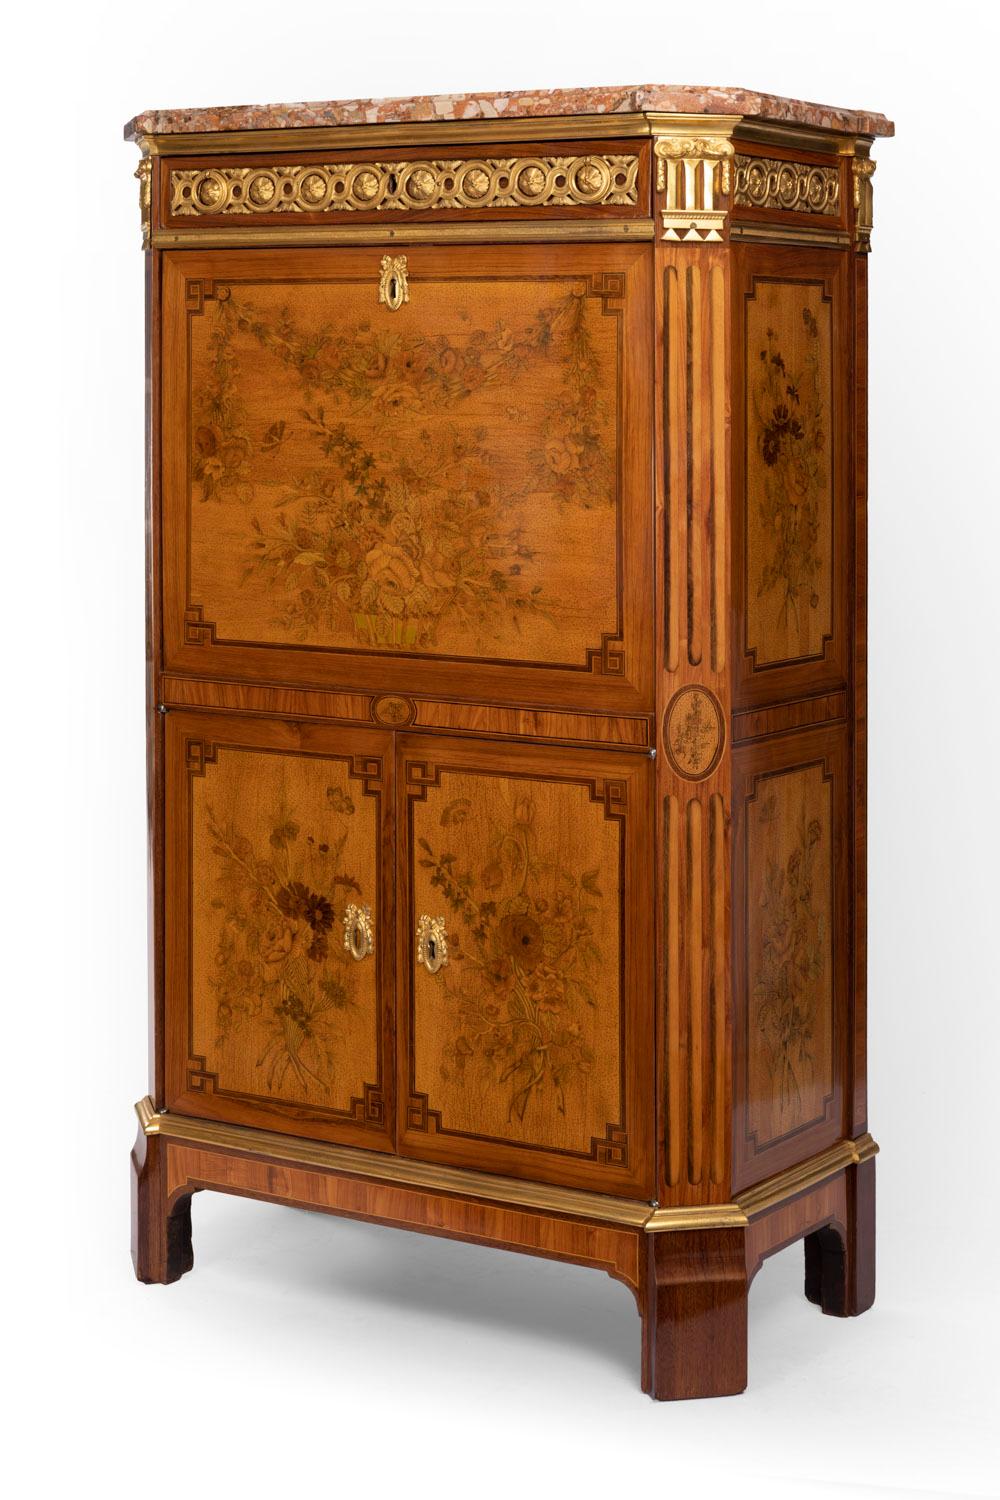 Desk in Flower Marquetry, Louis XVI Period, Stamped C. Topino, 18th Century For Sale 9